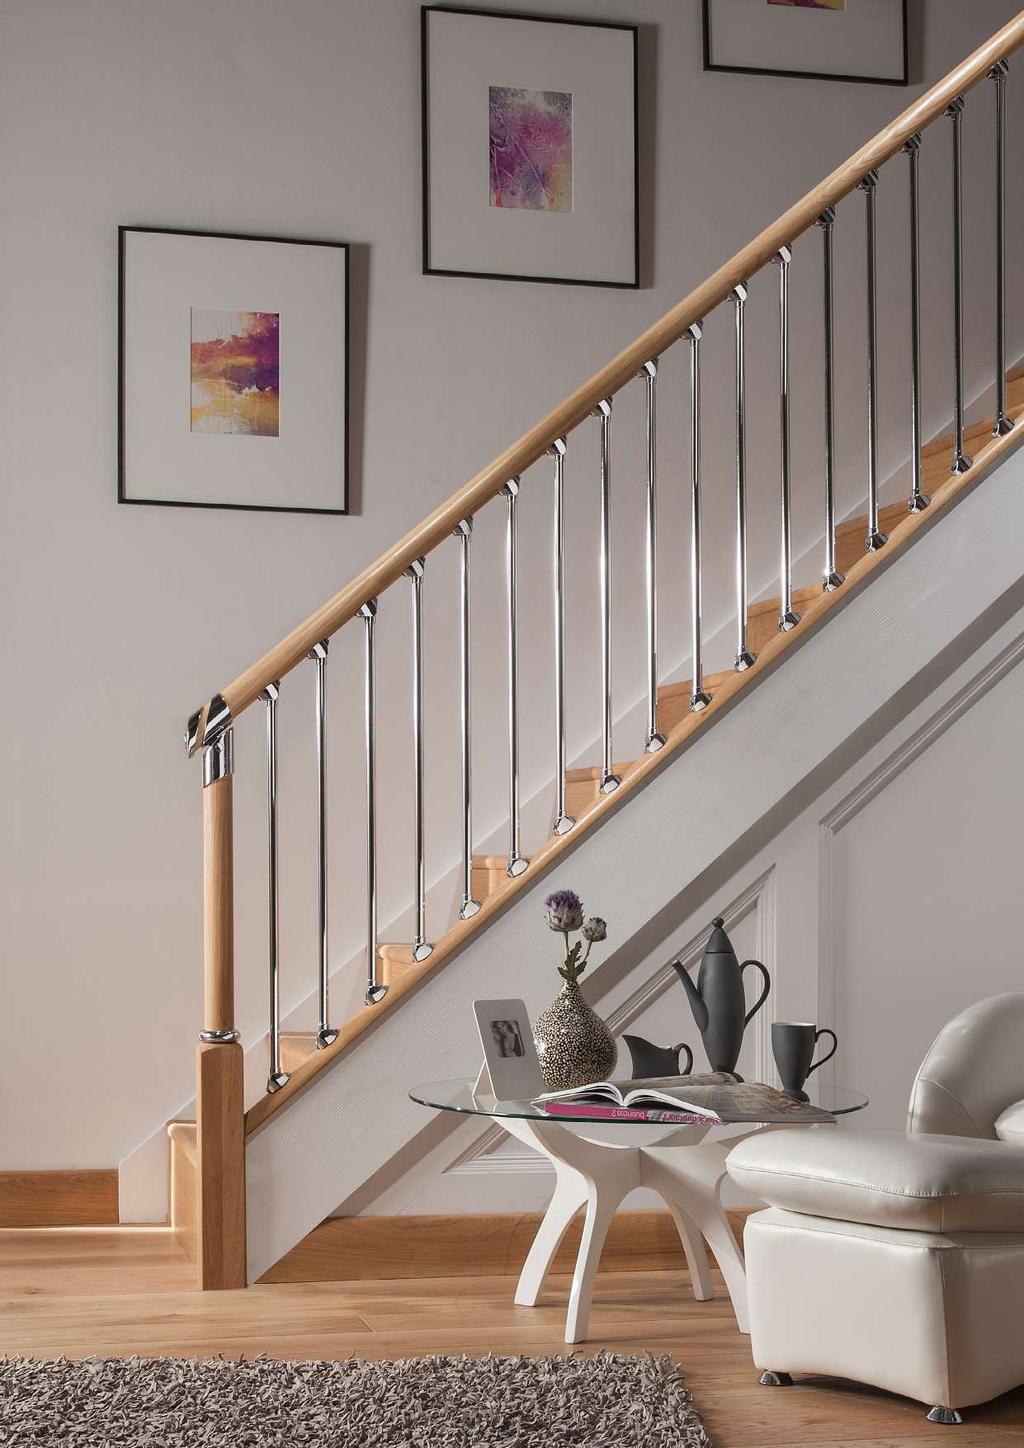 These Fitting Instructions are for use with the AXXYS range with metal balusters